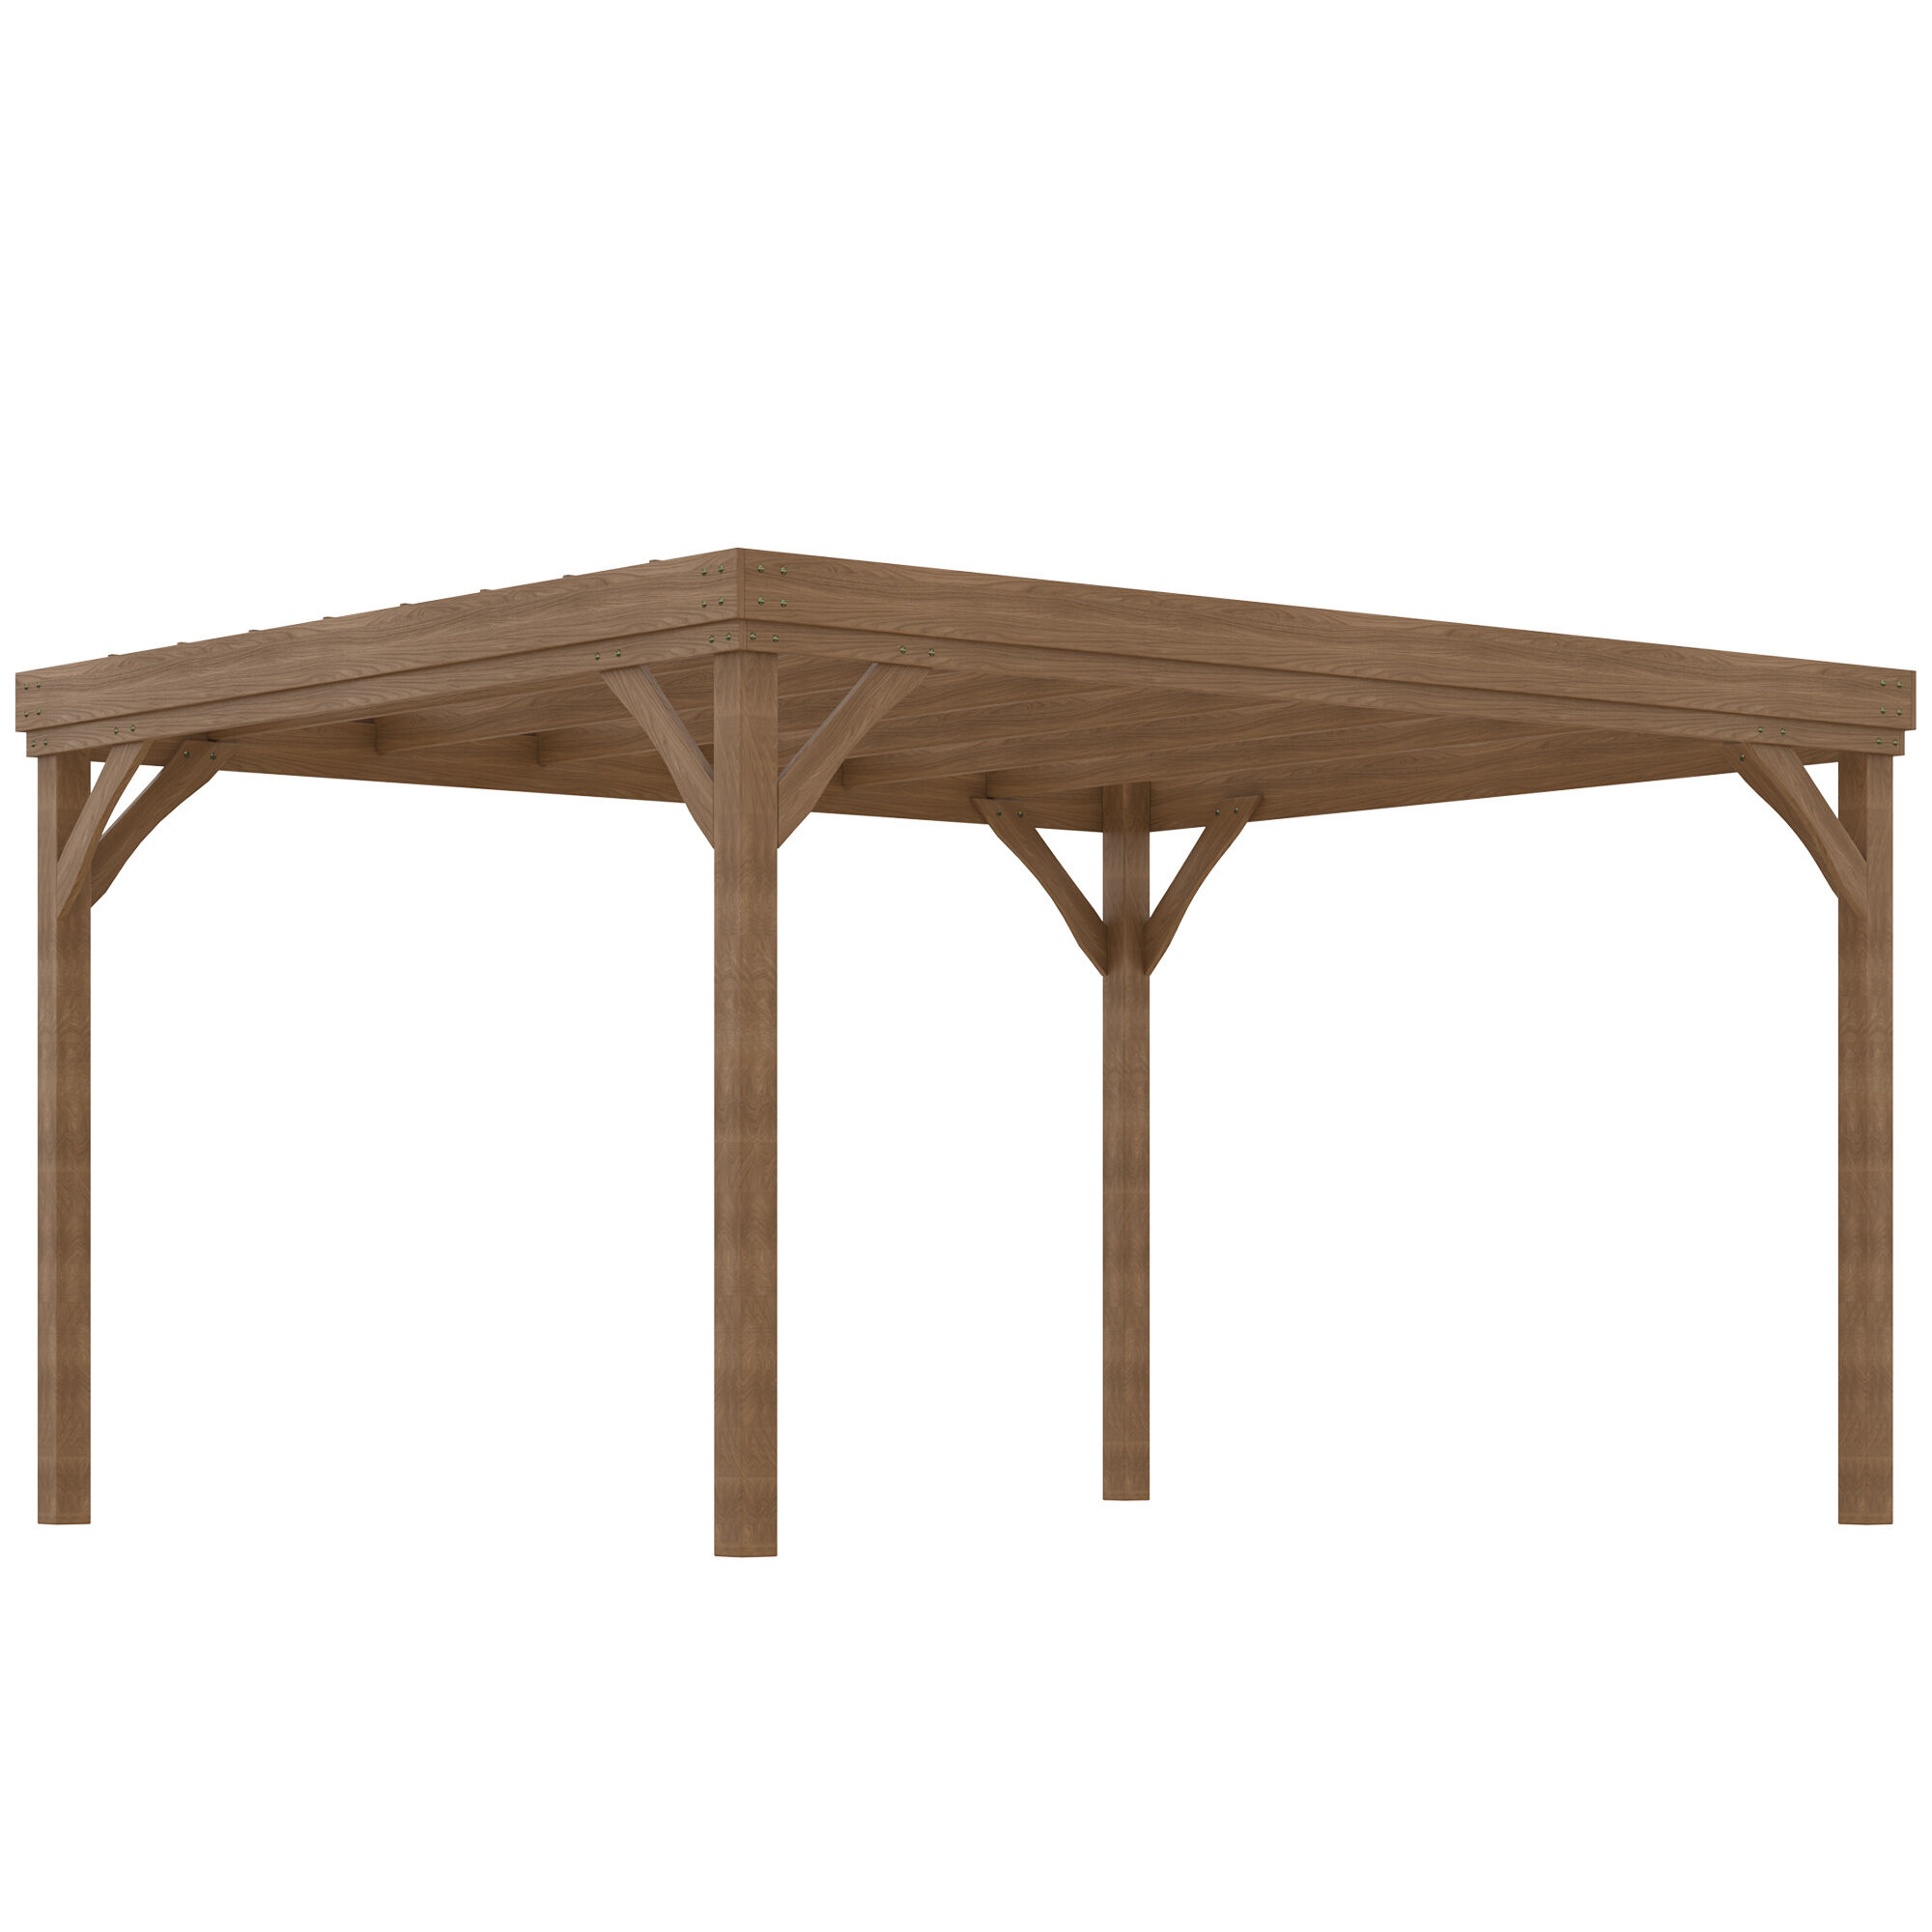 Outsunny 10' x 12' Outdoor Pergola, Wood Gazebo Grape Trellis with Stable Structure and Concrete Anchors, for Garden, Patio, Backyard, Deck